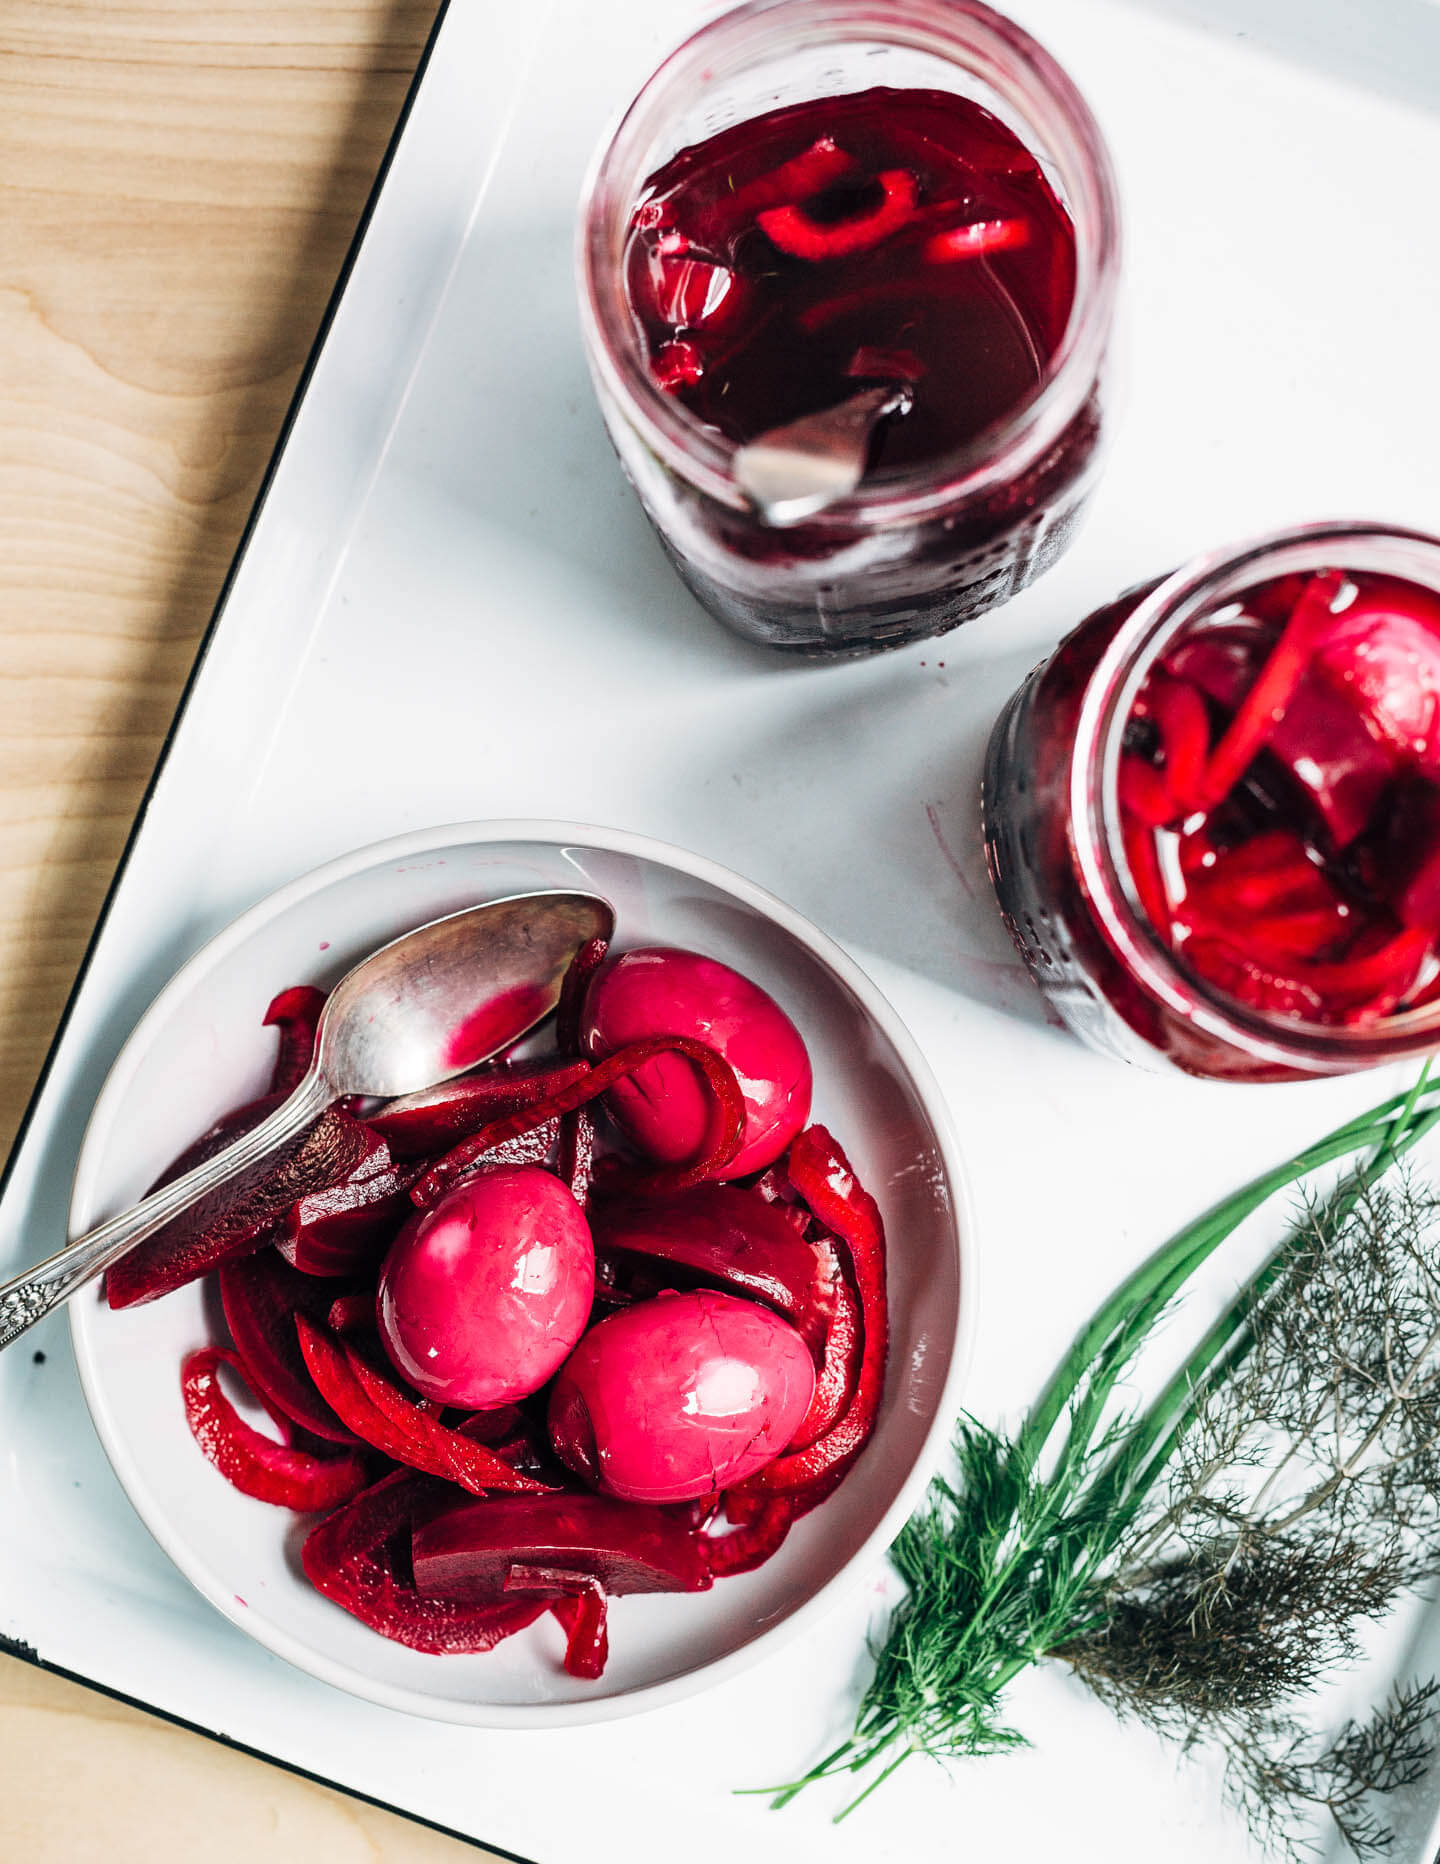 Extremely pink beet-pickled eggs aren't just beautiful, they're suffused with a richly flavored sweet and sour brine that pops with every bite. Serve the eggs alongside the pickled beets and red onions, and top with a dollop of sour cream and horseradish sauce and fresh garden herbs.